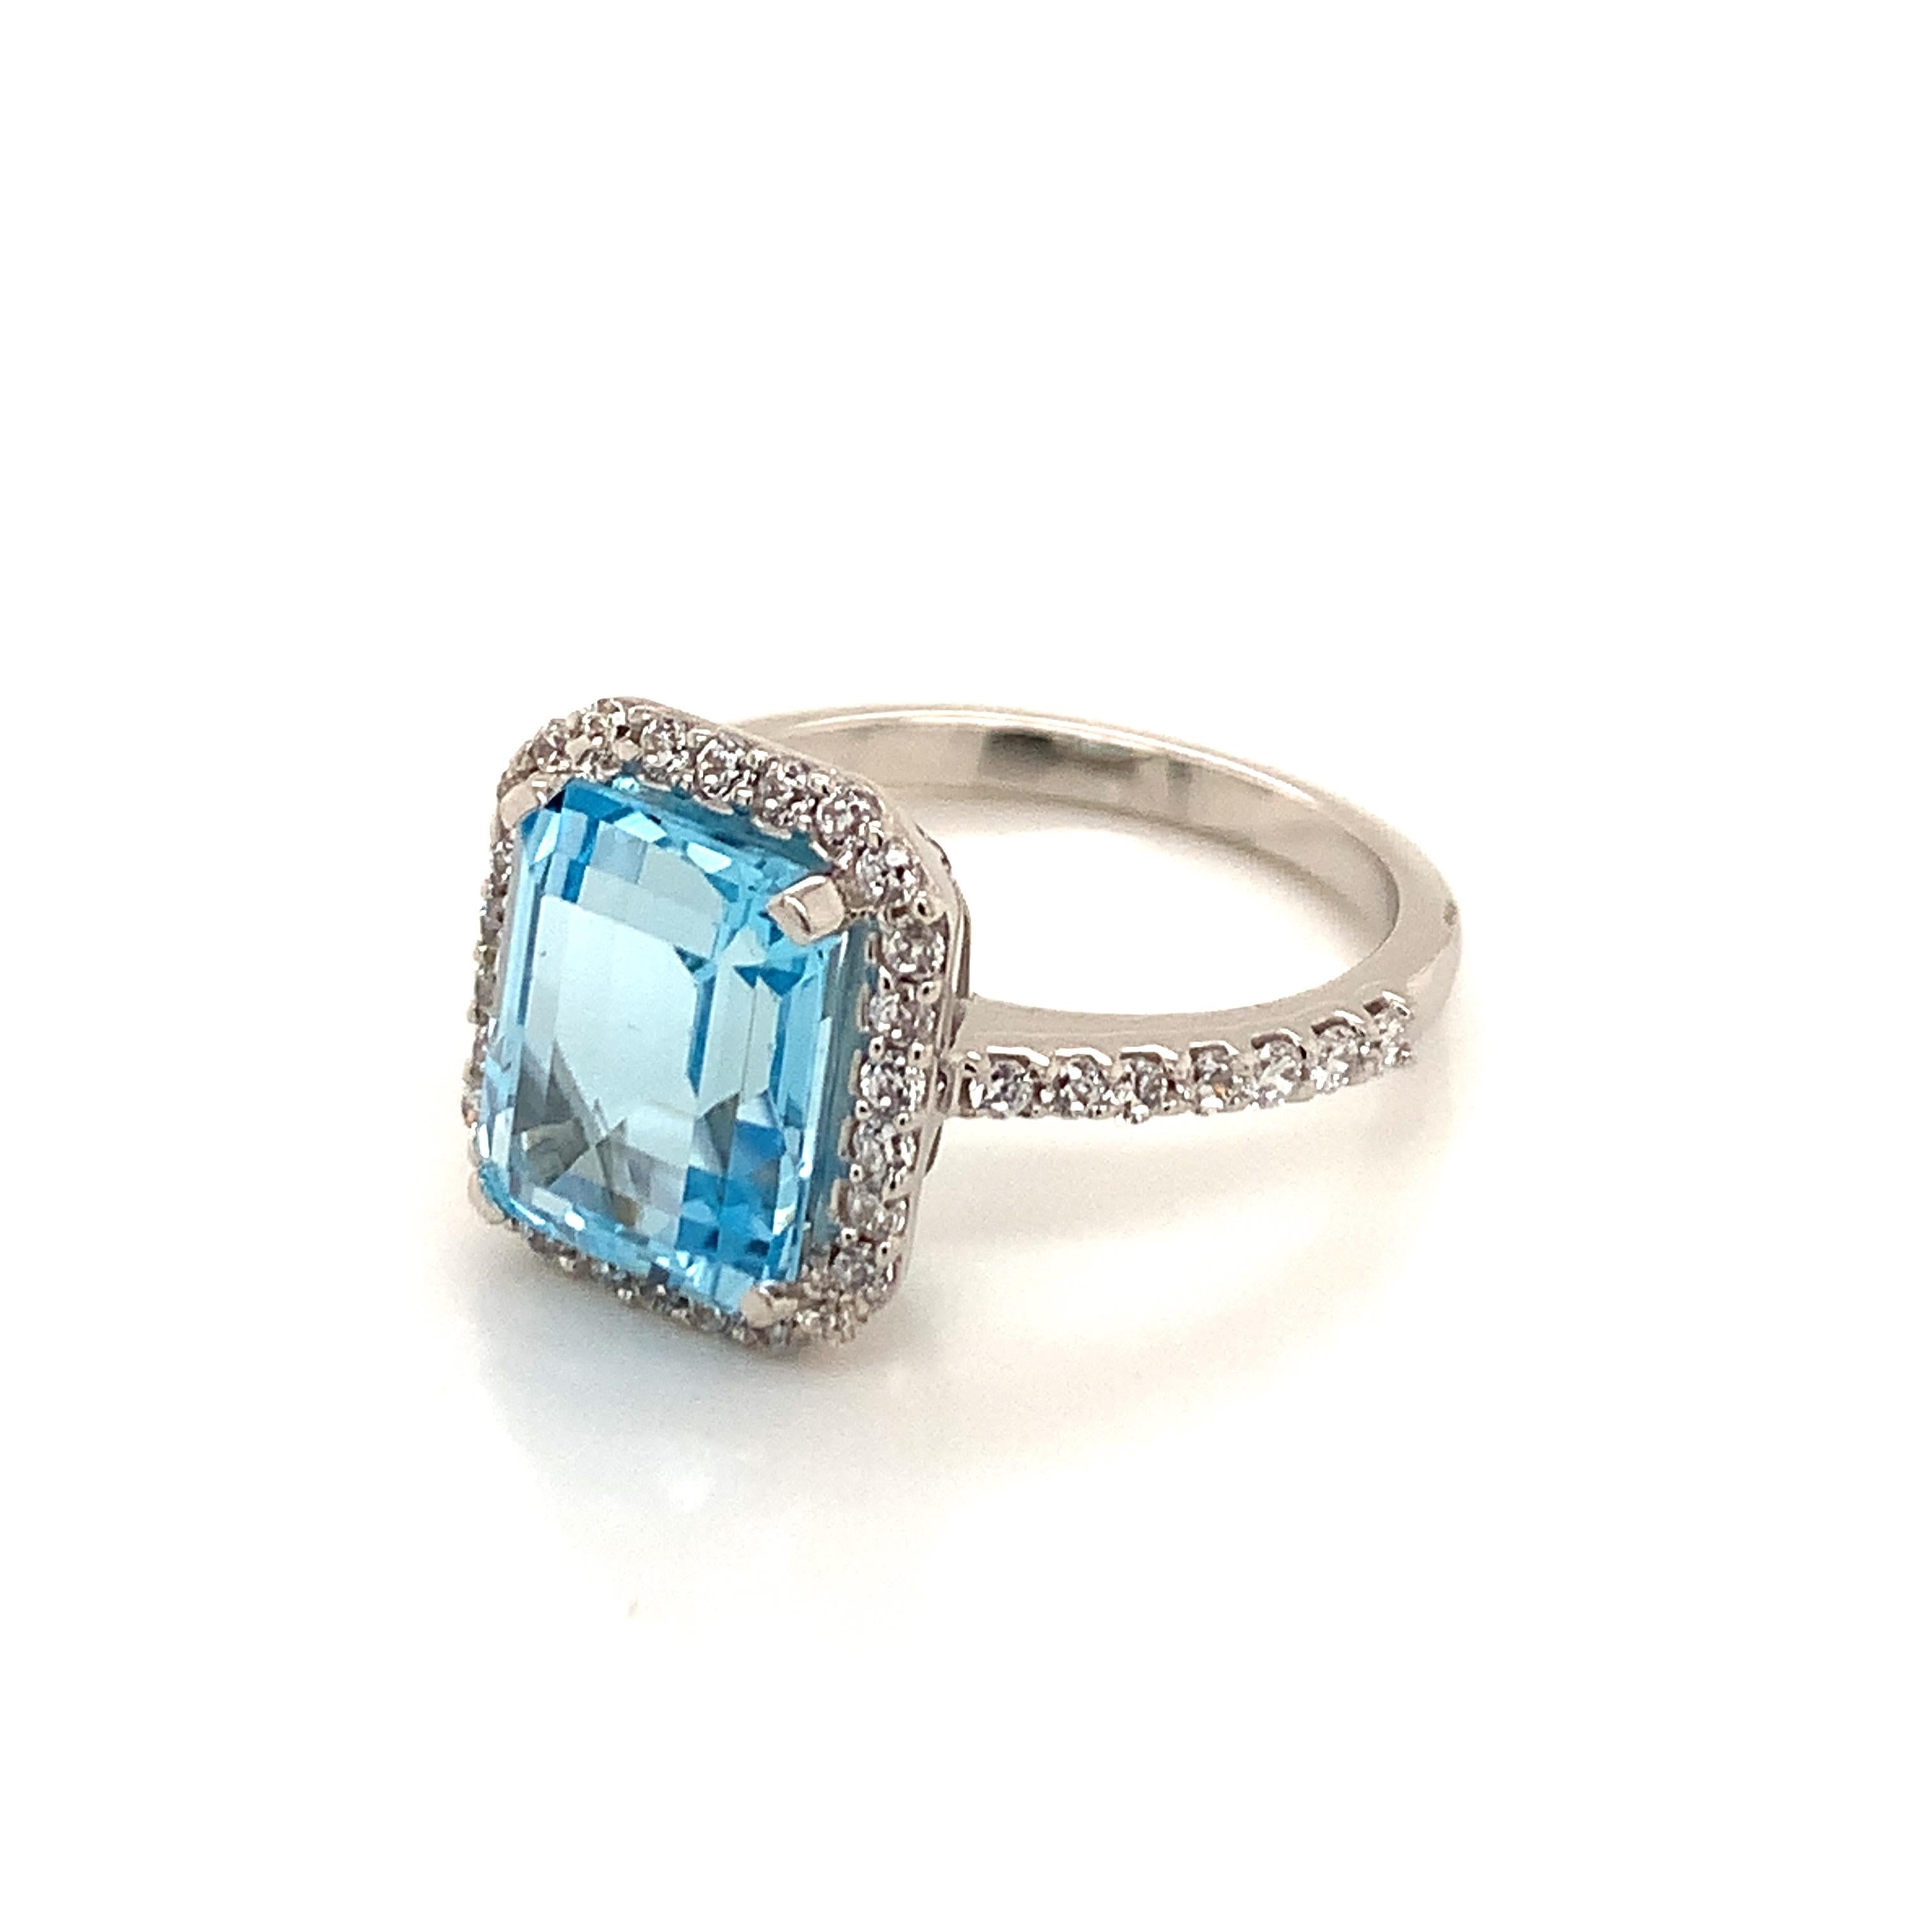 Octagon Shape Sky Blue Topaz Gemstone beautifully crafted with CZ in a Ring. A fiery Blue color December Birthstone. For a special occasion like Engagement or Proposal or may be as a gift for a special person.

Primary Stone Size - 10x8mm